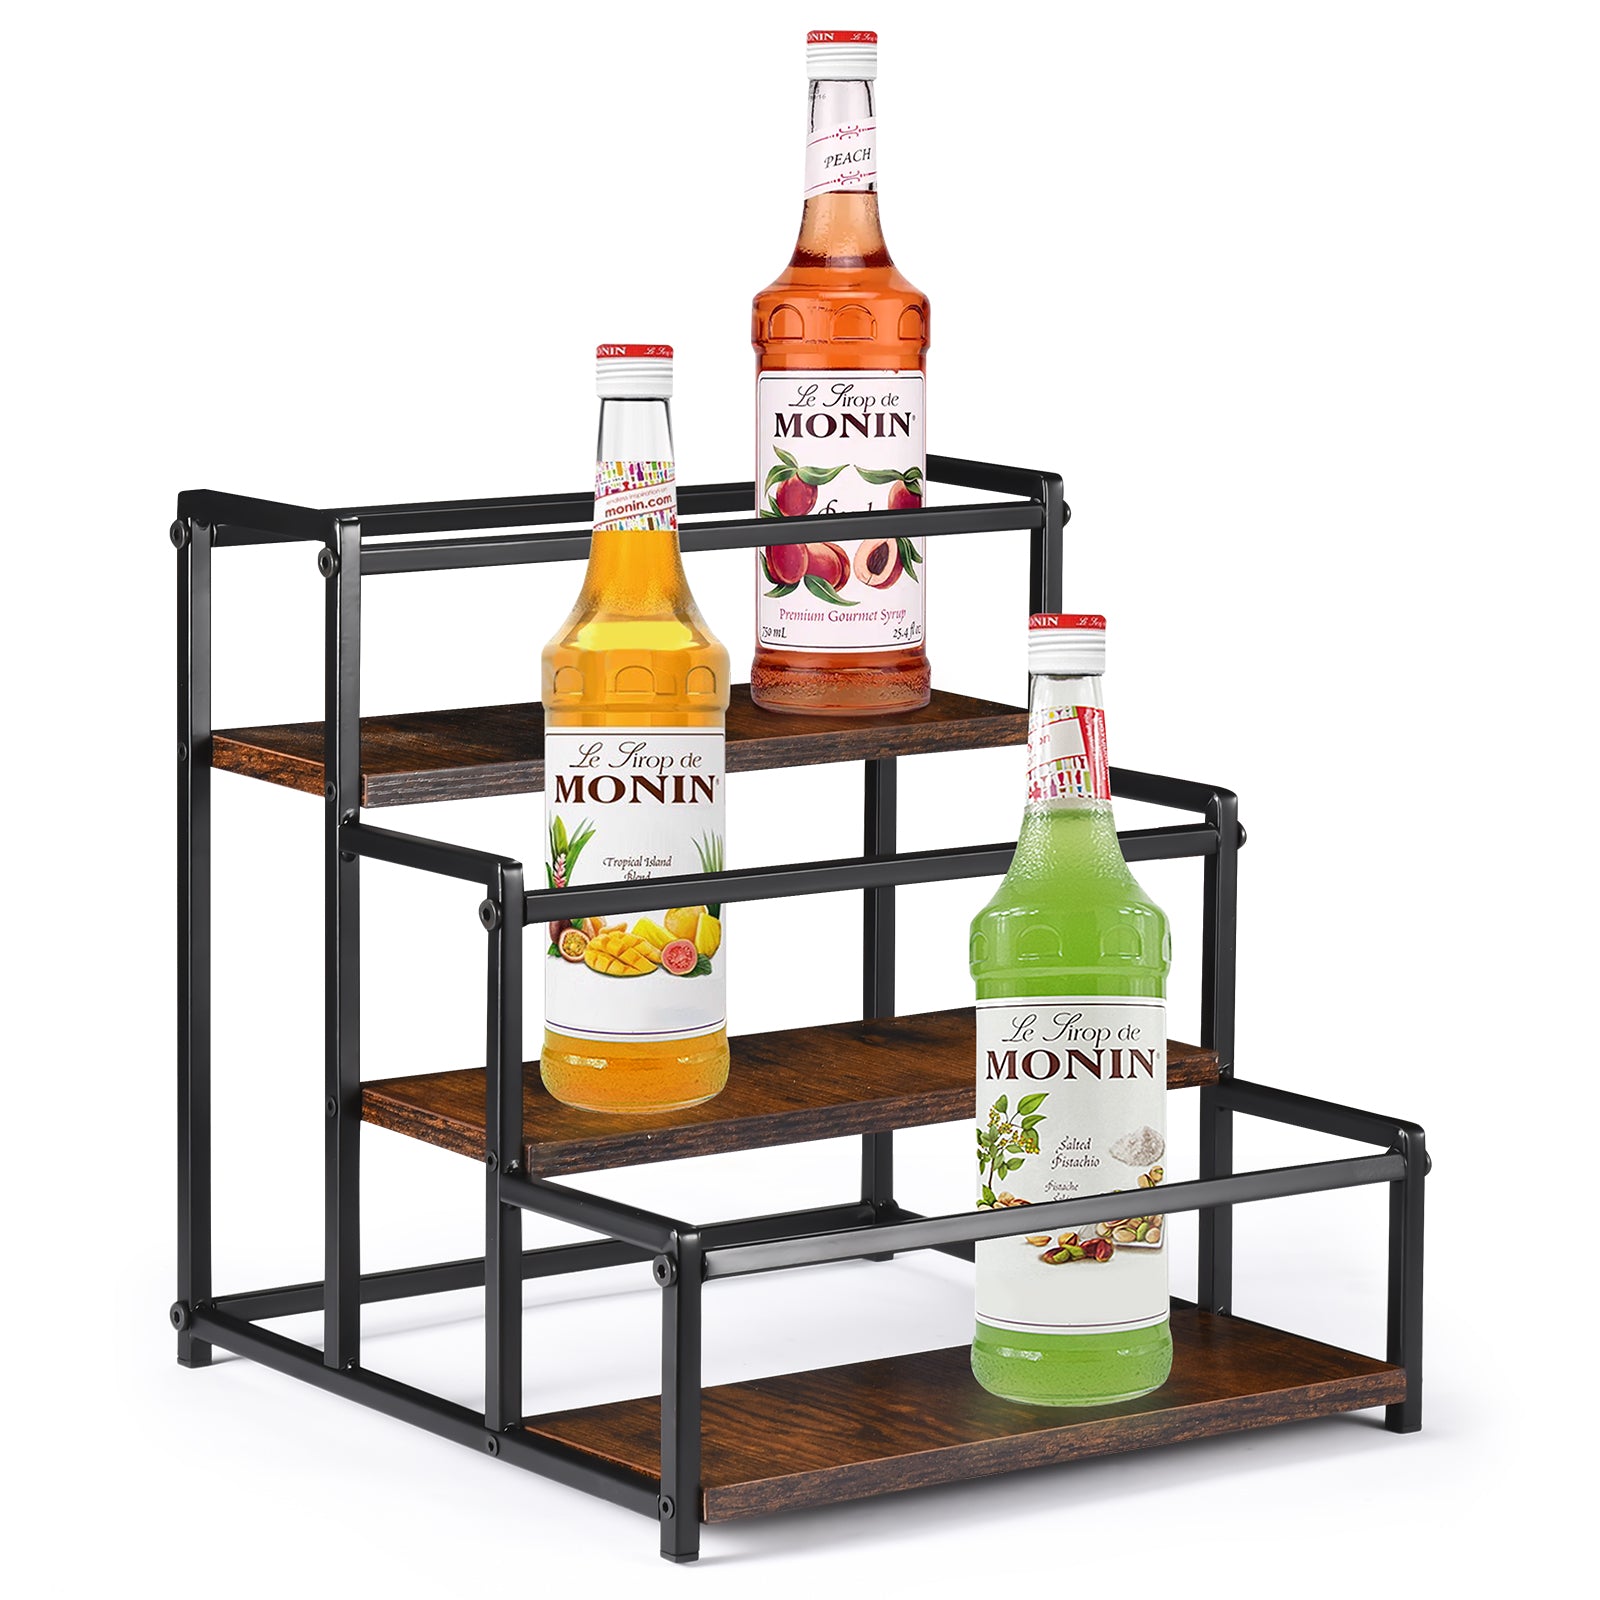 GADFISH Coffee Syrup Rack Organizer, 3 Tier Syrup Bottle Holder Stand for Coffee Bar, 12 Bottles Storage Shelves for Syrup, Wine, Dressing for Kitchen Coffee Station Countertop Tabletop Wine Rack